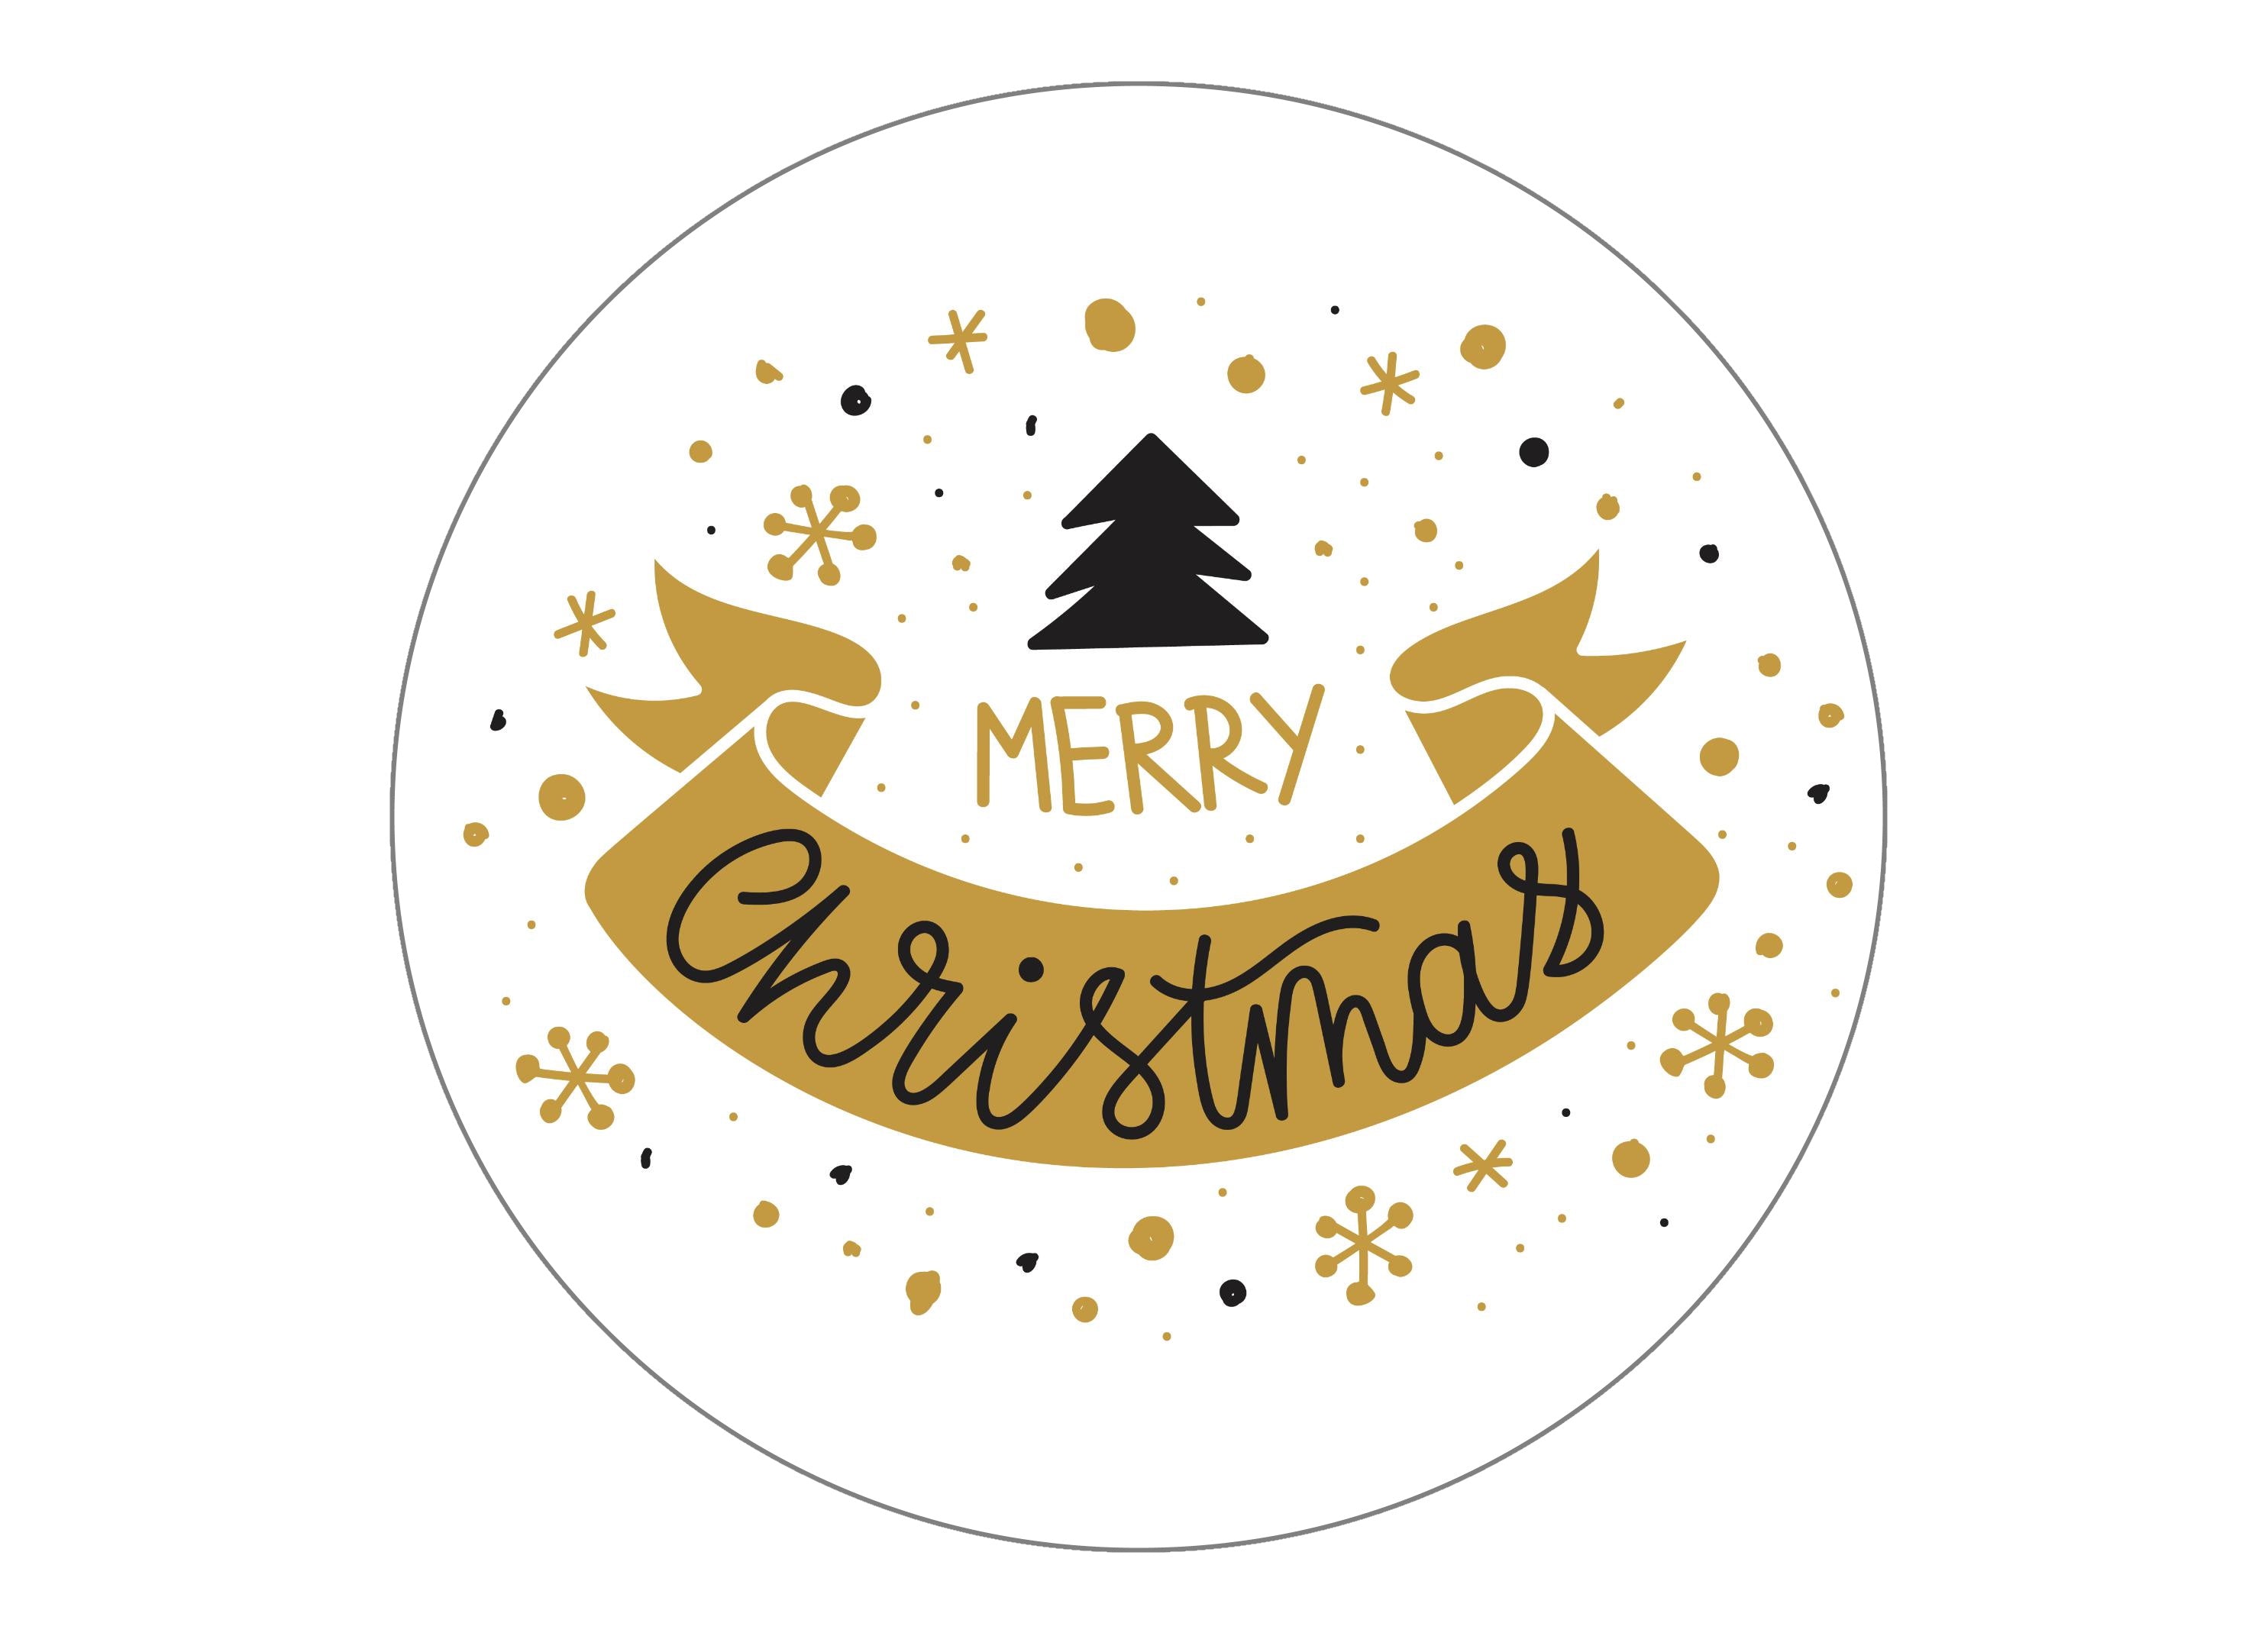 Large Merry Christmas cake topper in black and gold